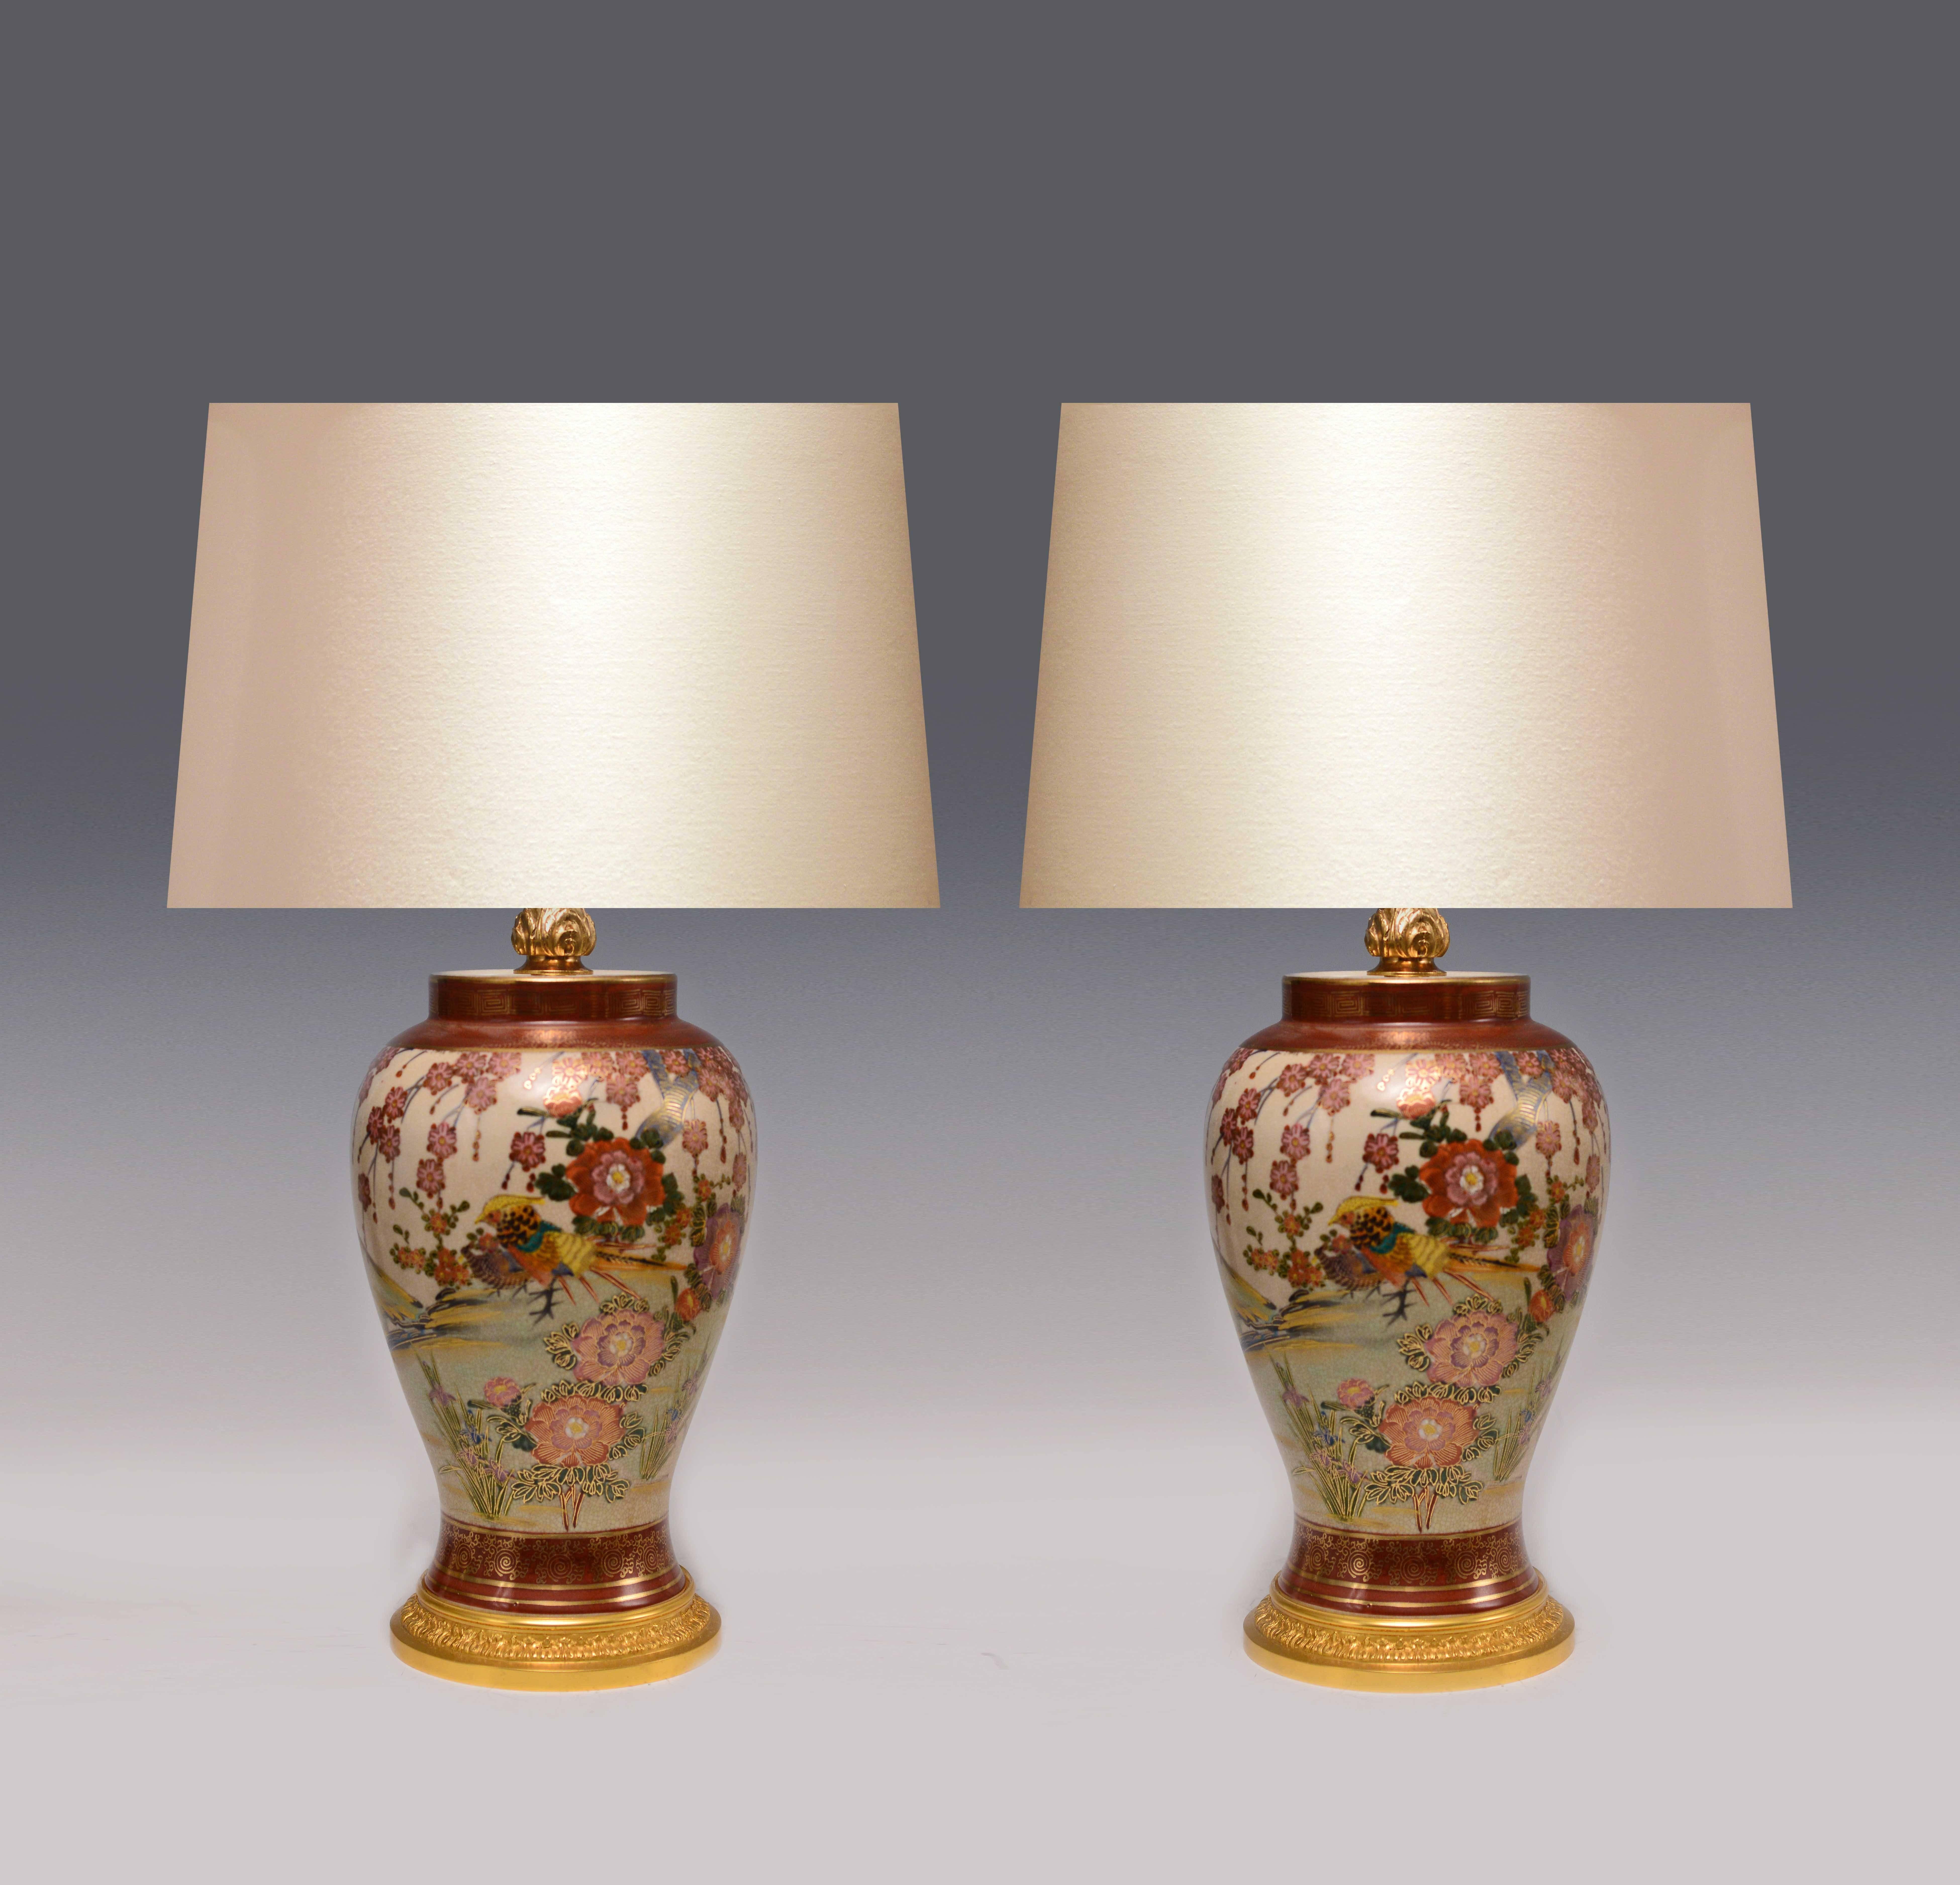 A fine painted porcelain vases with birds and flowers decorations, mounted as a lamp.
To the porcelain: 12